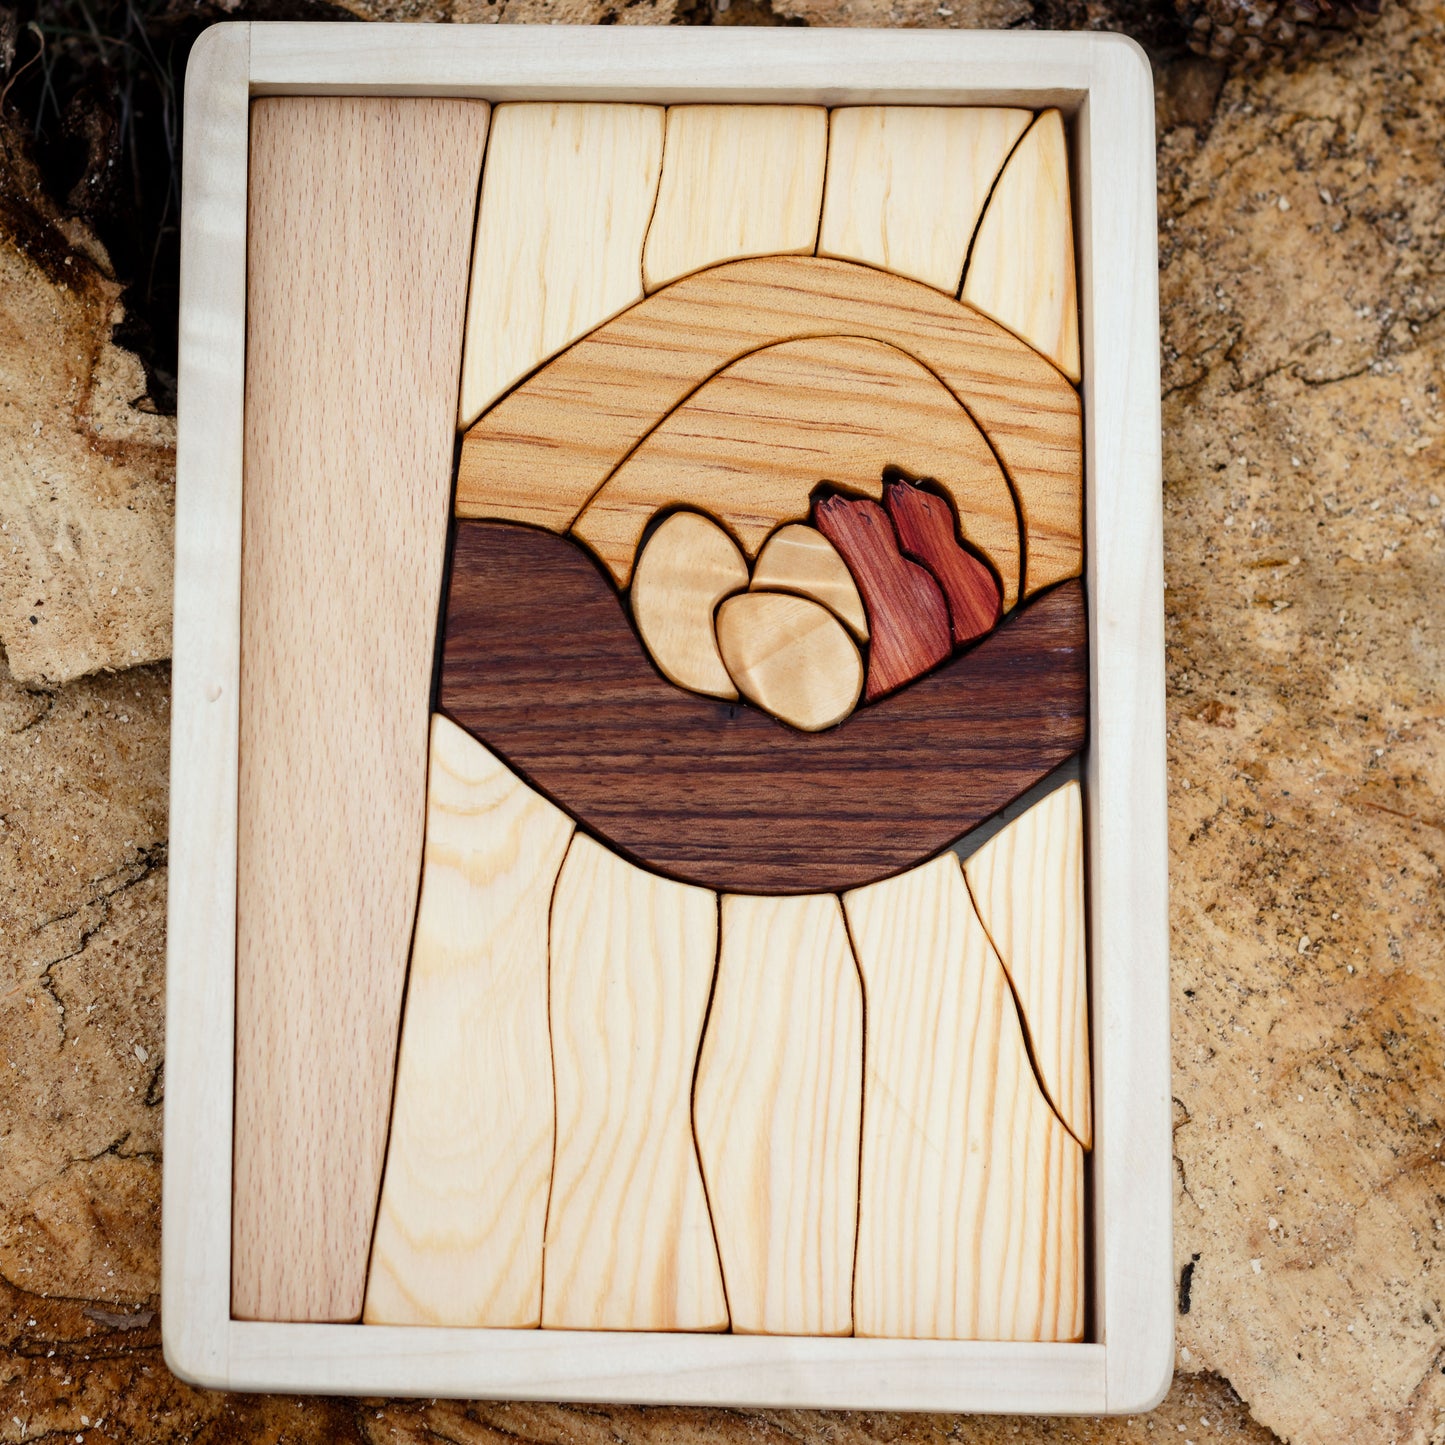 Wooden toy puzzle from Cocoletes- view of the other side featuring the nest